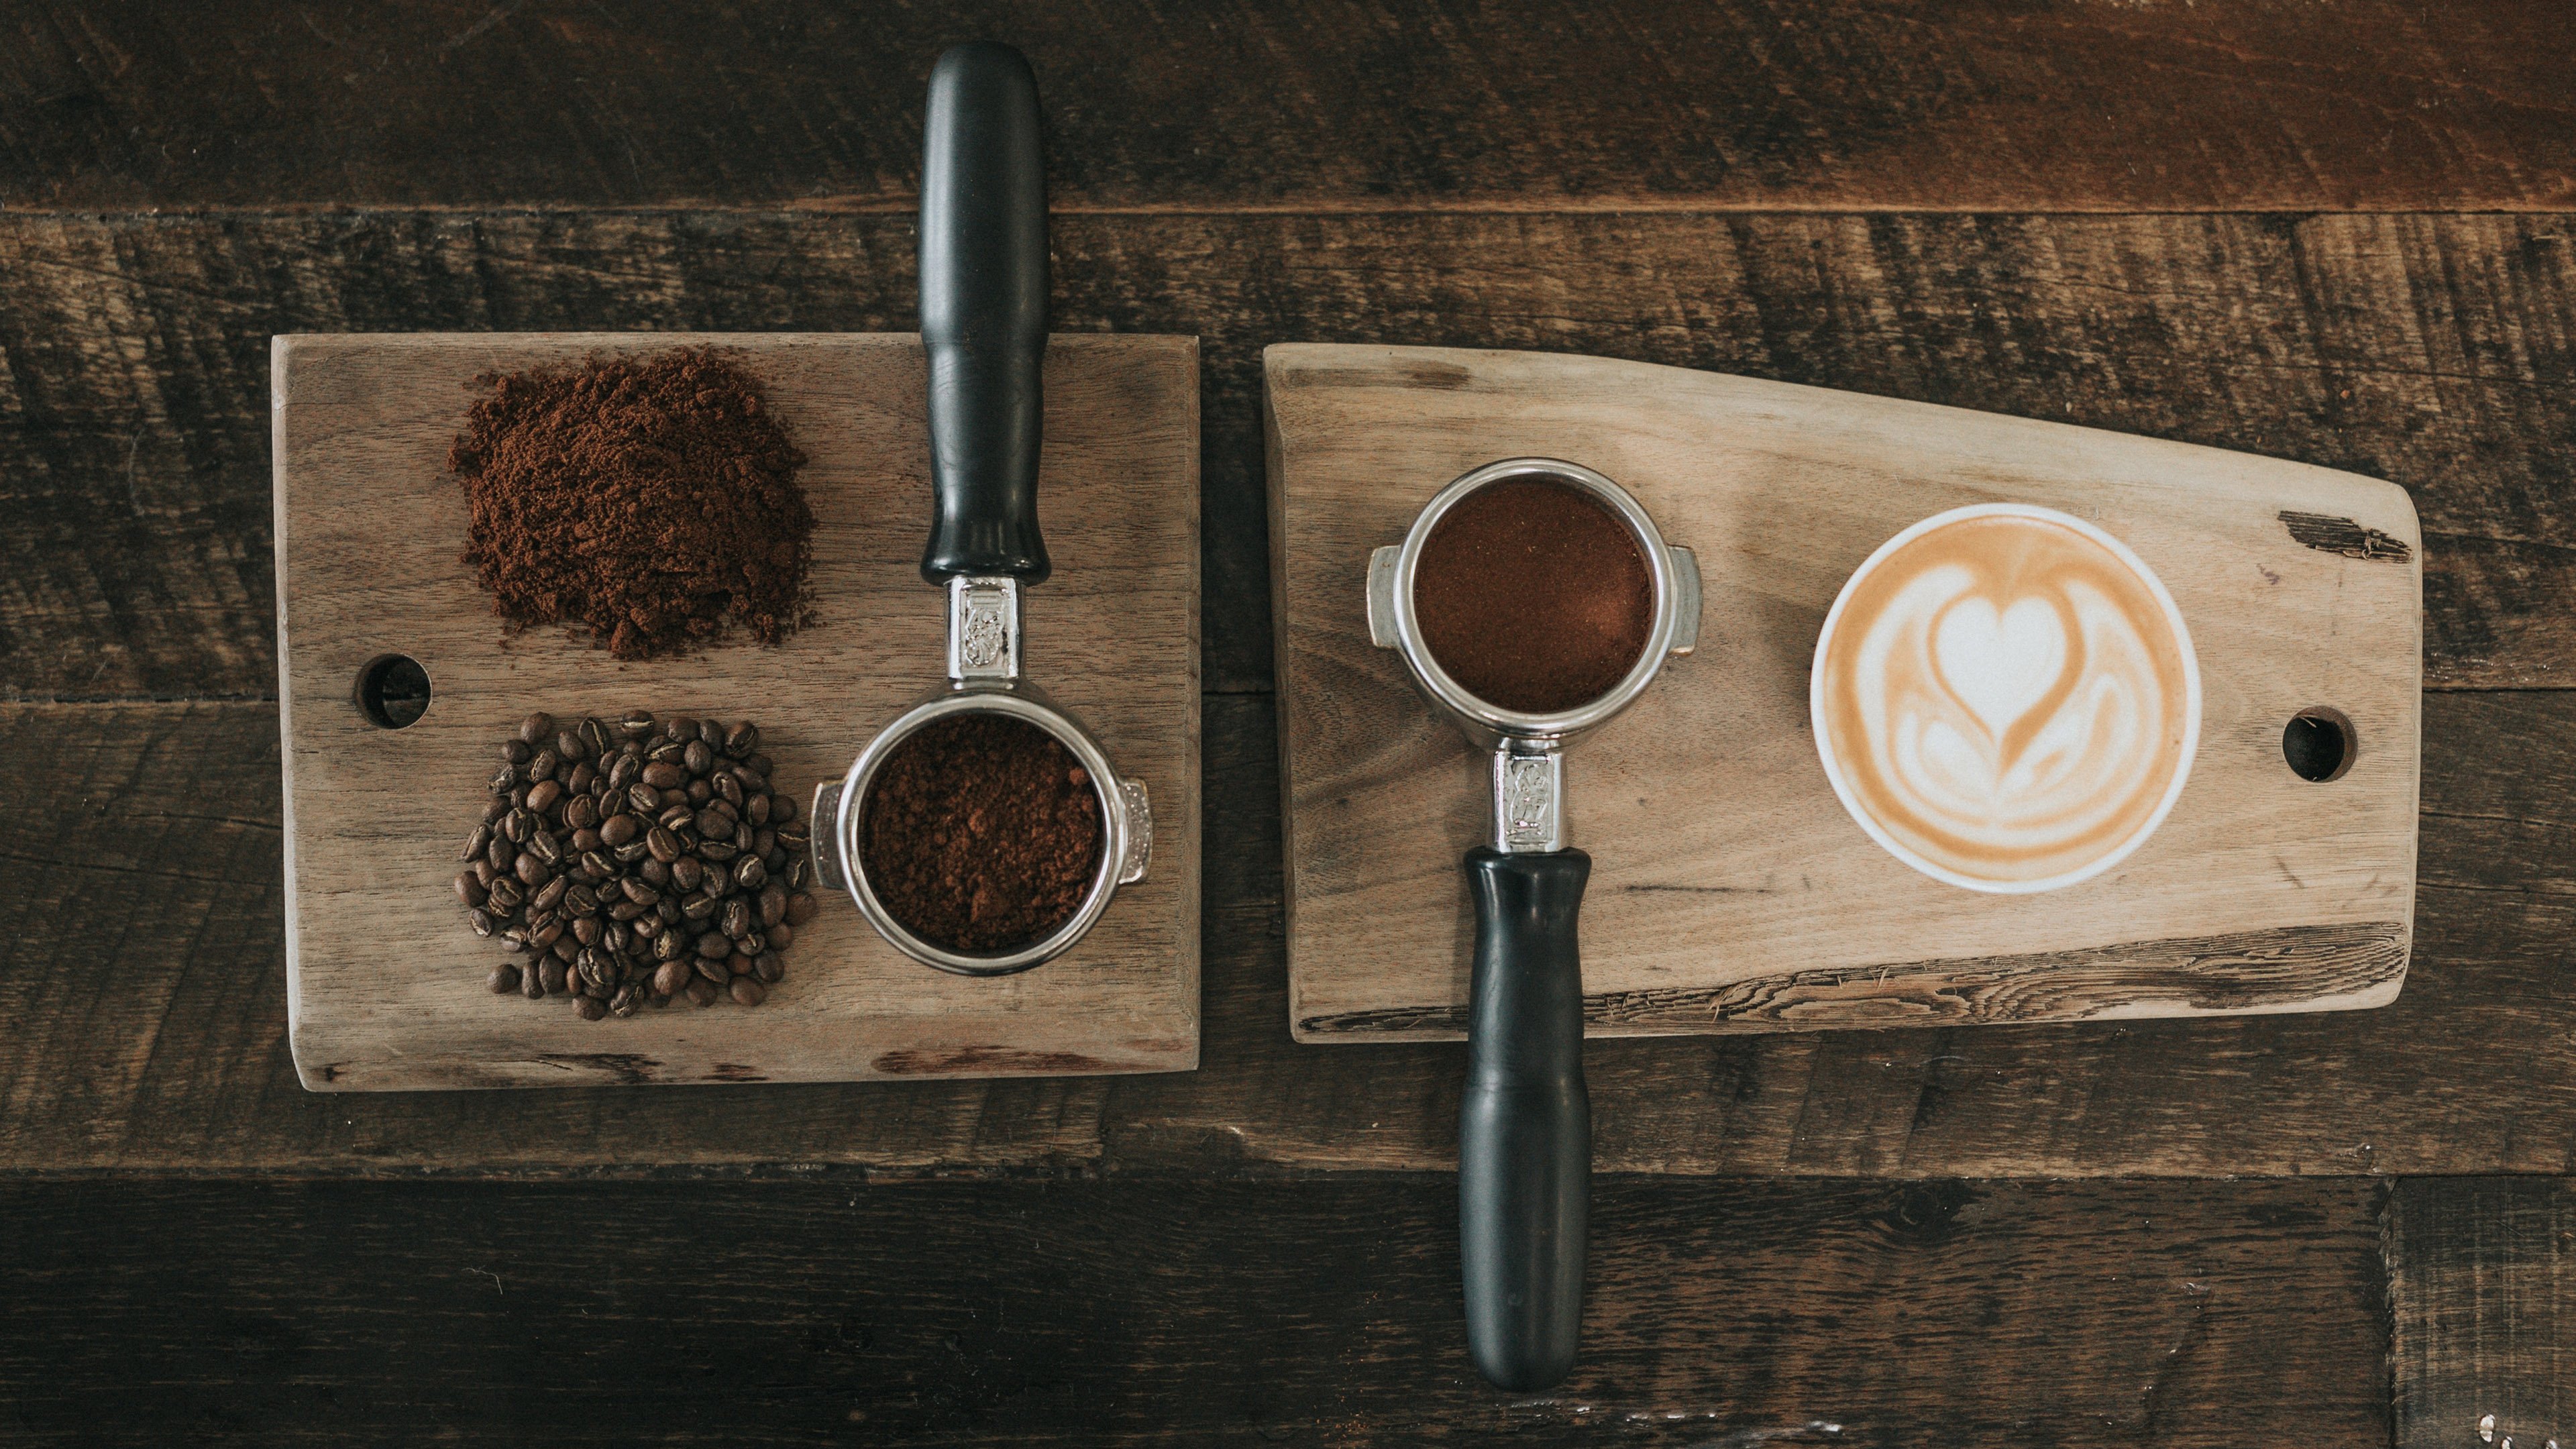 coffee, Coffee beans, Latte, Latte art, Wooden surface, Wood, Texture